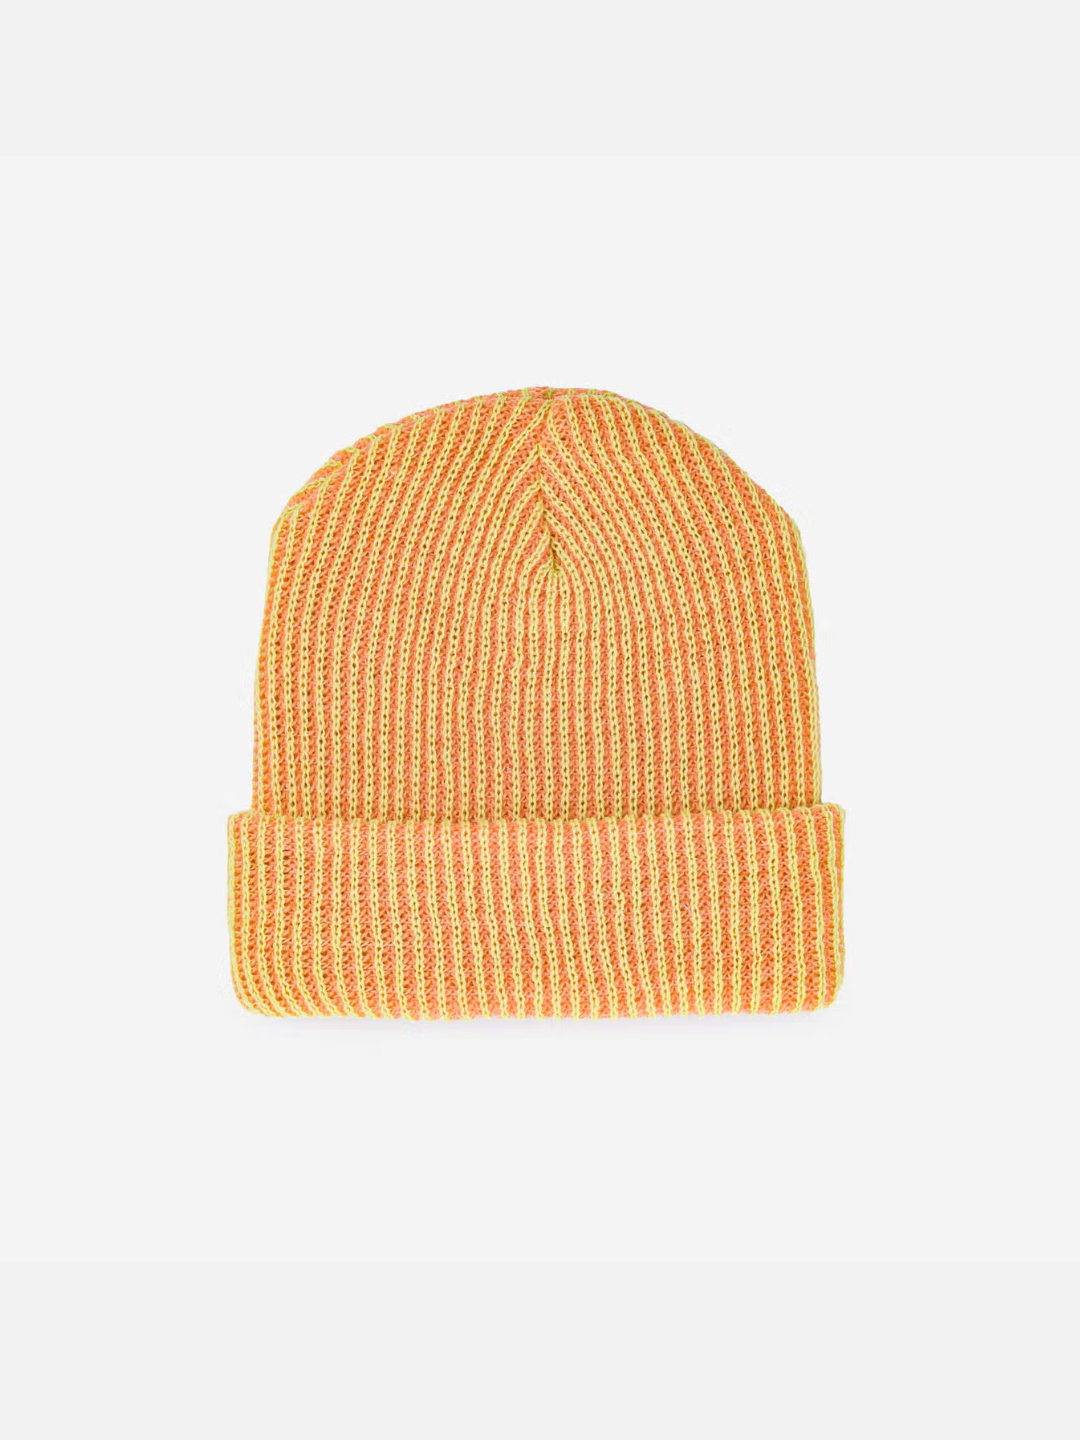 Front view of a peachy orange ribbed beanie for big kids and adults, with a ribbed cuff. The ribbed texture reveals a second yarn color that's yellow.